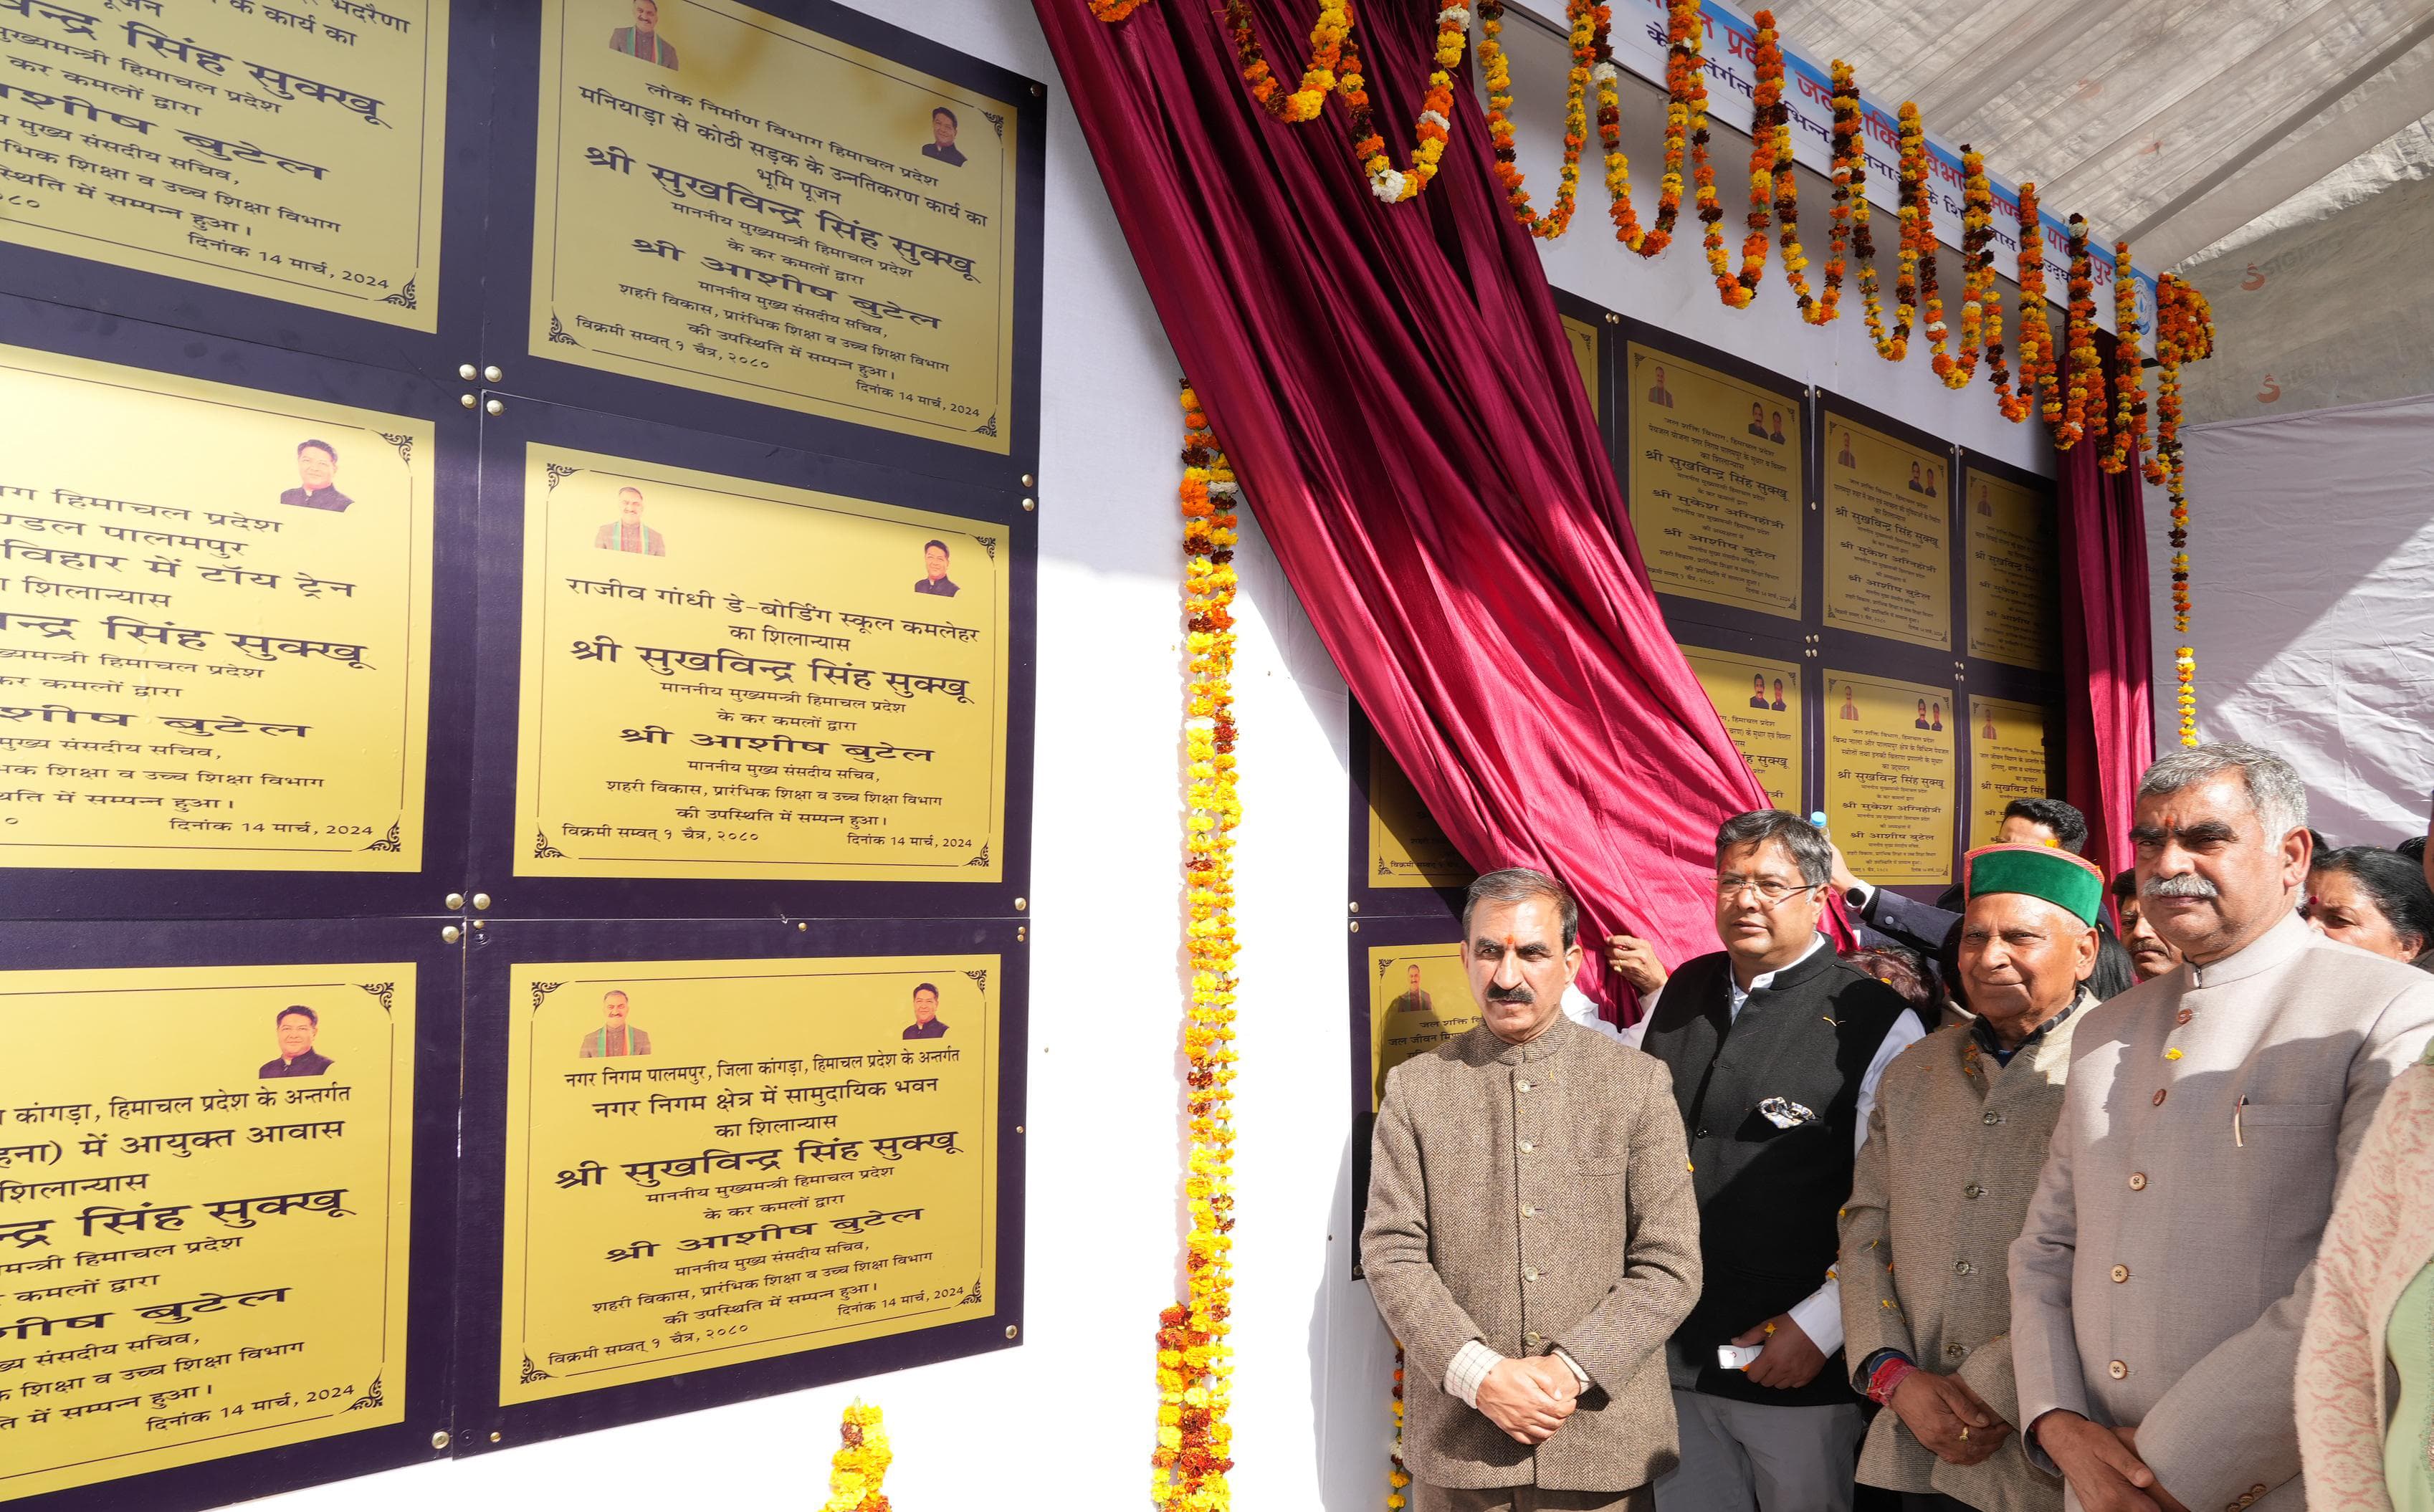 Rs. 250 Crore Announced For Palampur Infrastructure, Tourism And Social Welfare Initiatives 